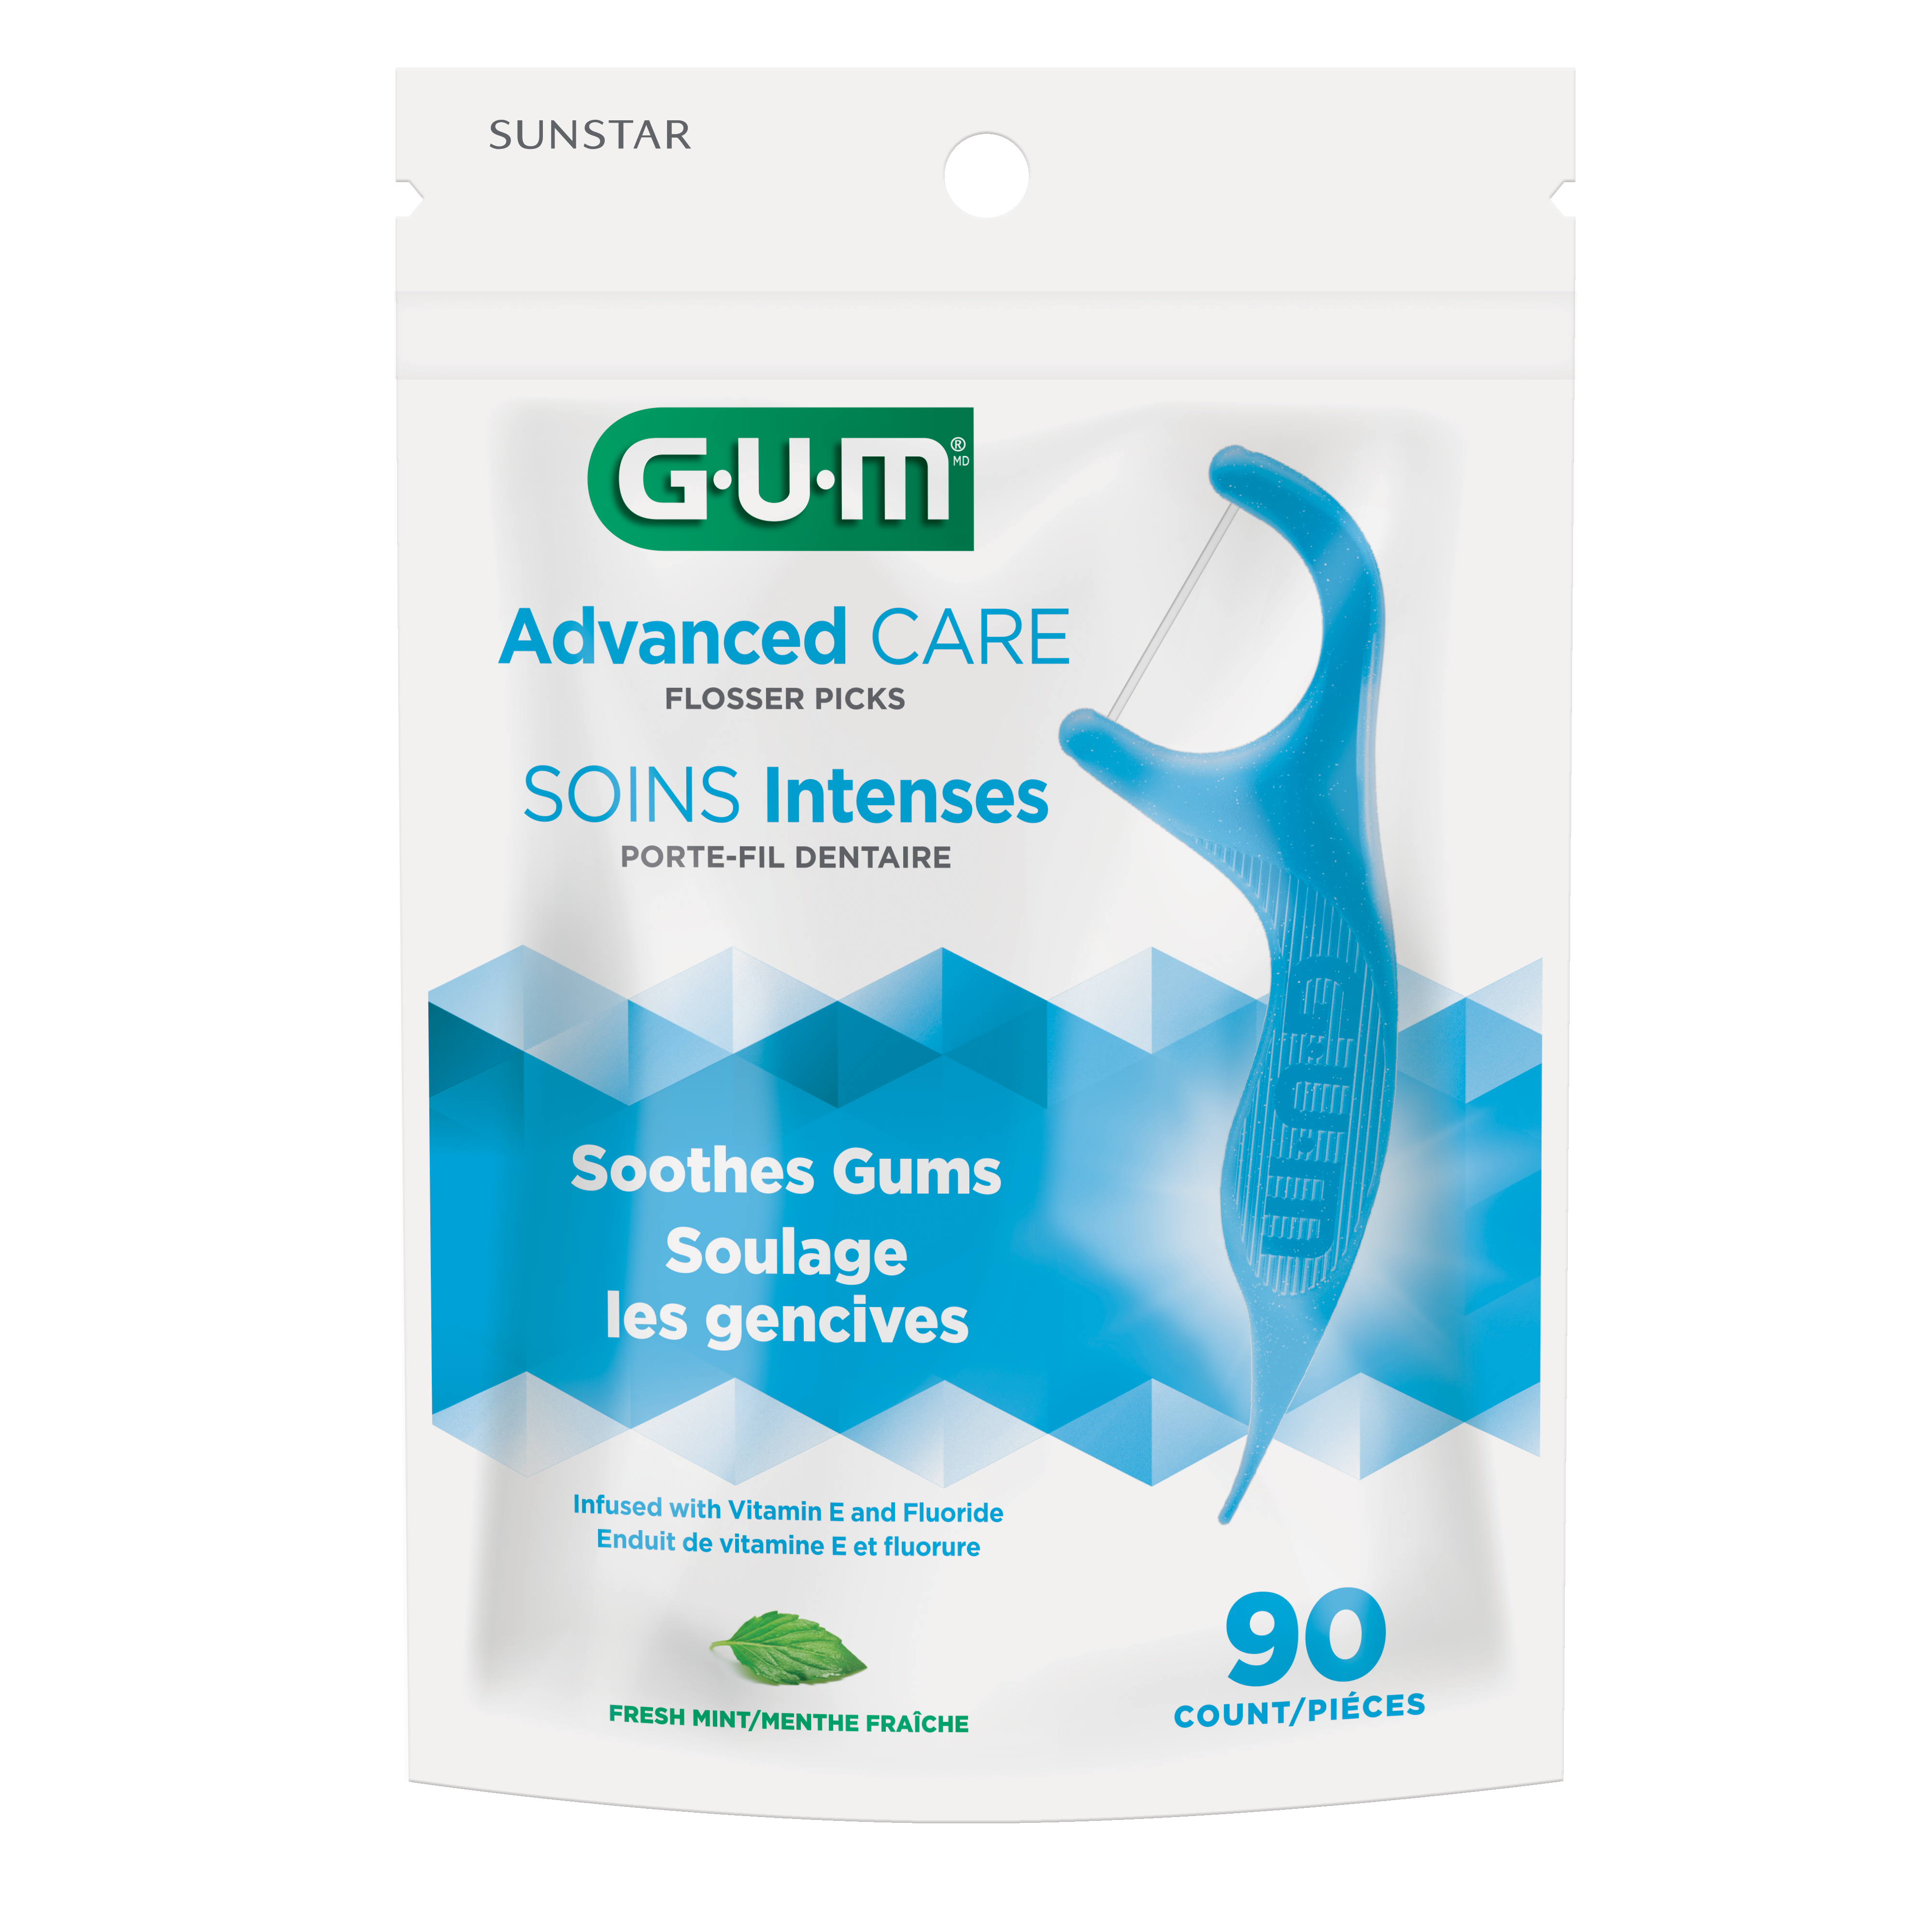 GUM Advanced Care Flossers With Vit E And Fluoride